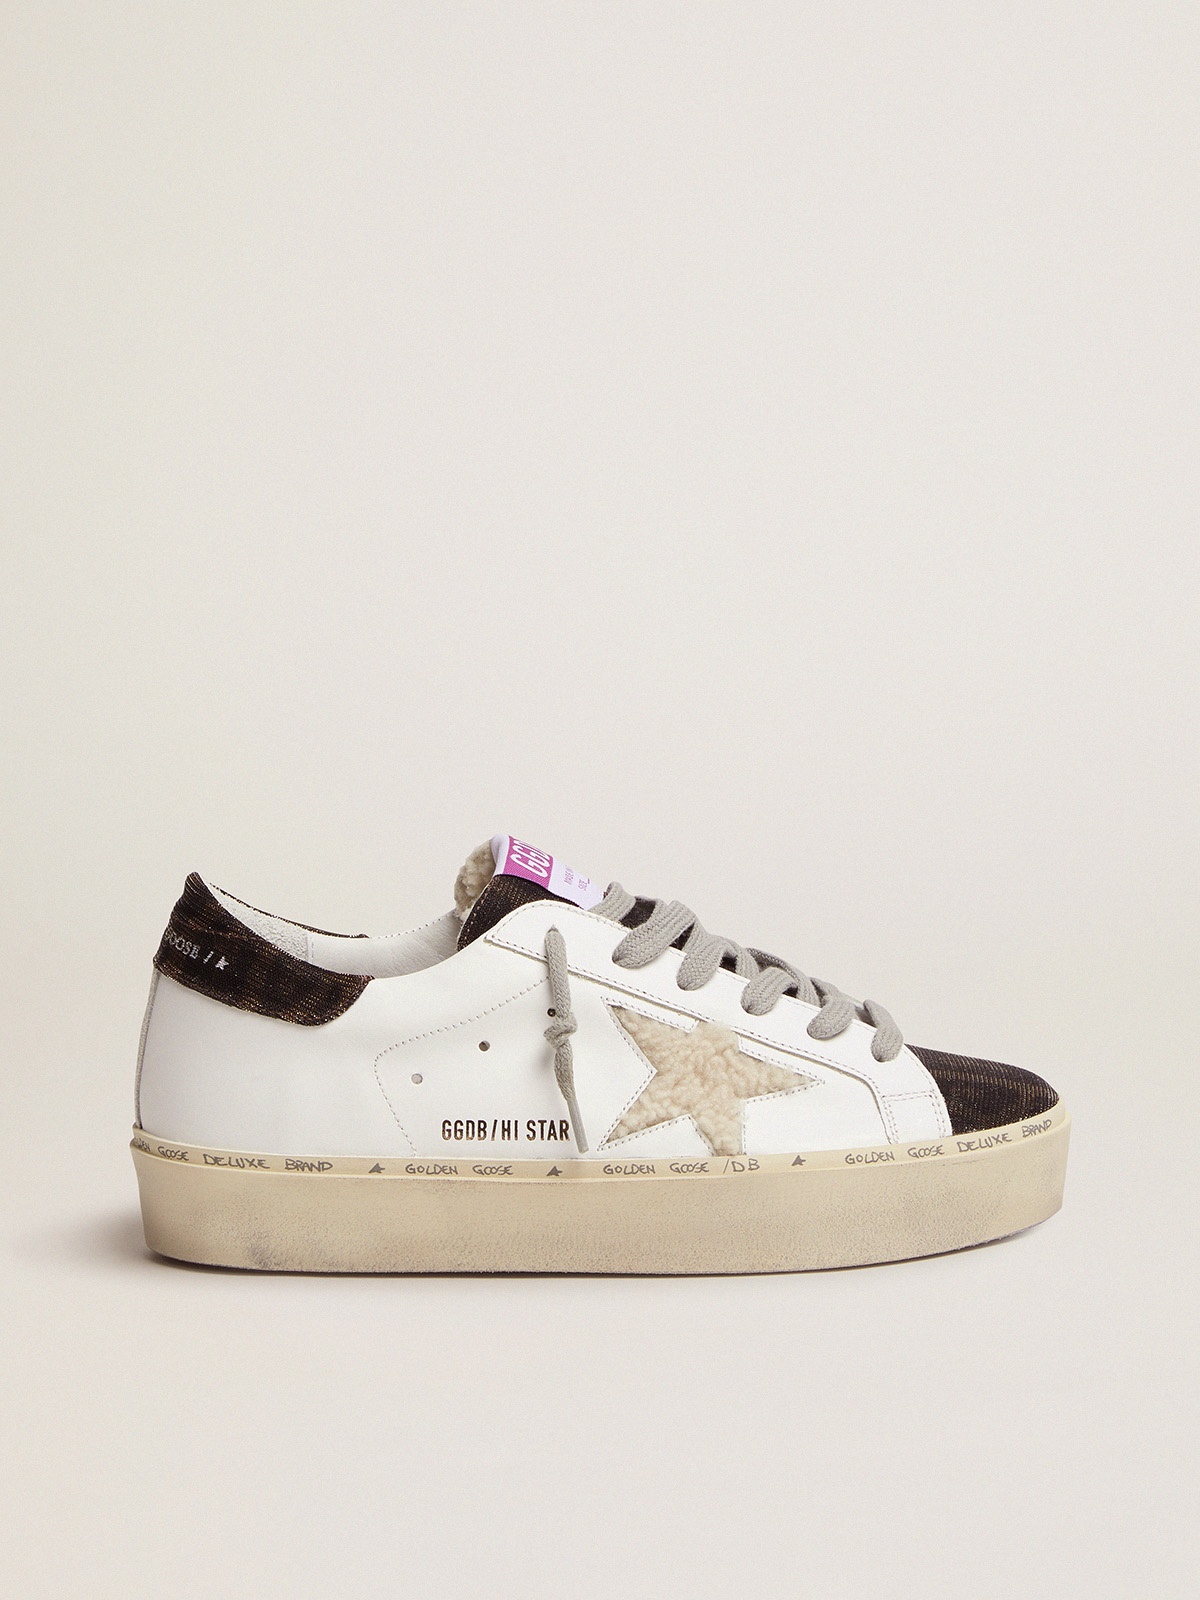 Hi Star sneakers with shearling star and leopard-print tongue | Golden Goose